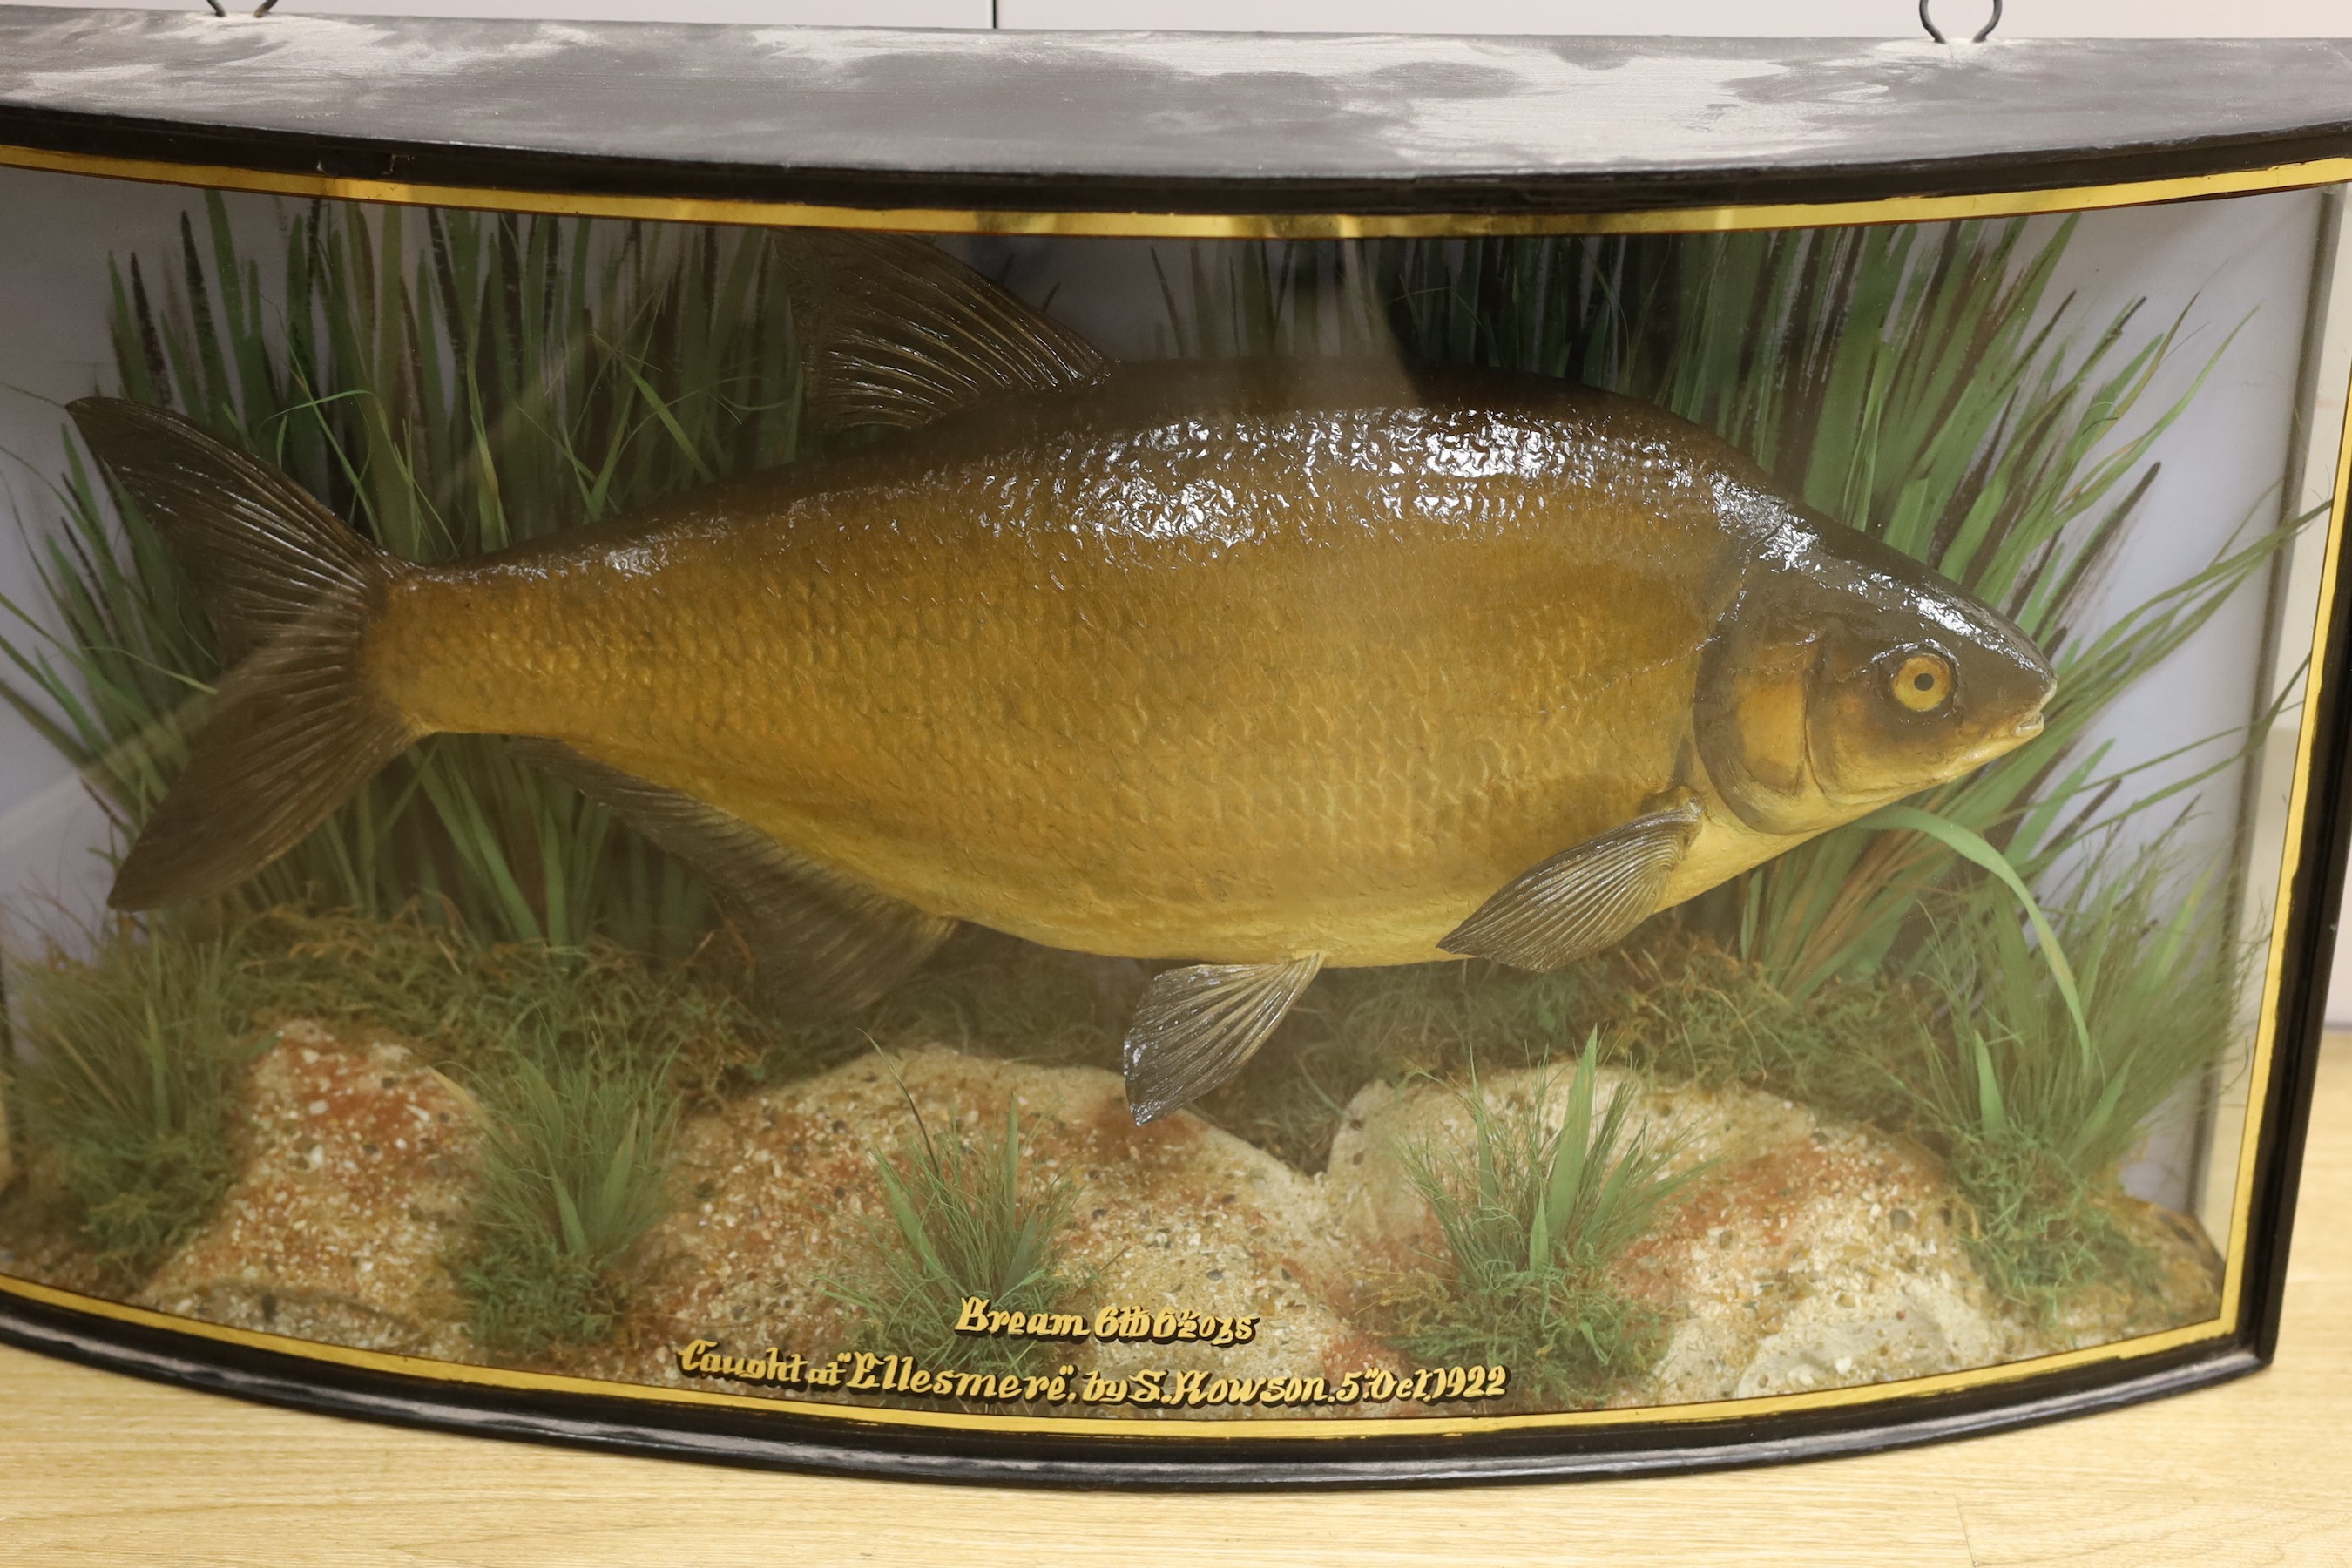 A cased taxidermic bream, 1922, caught at “Ellesmere” by S.Howson